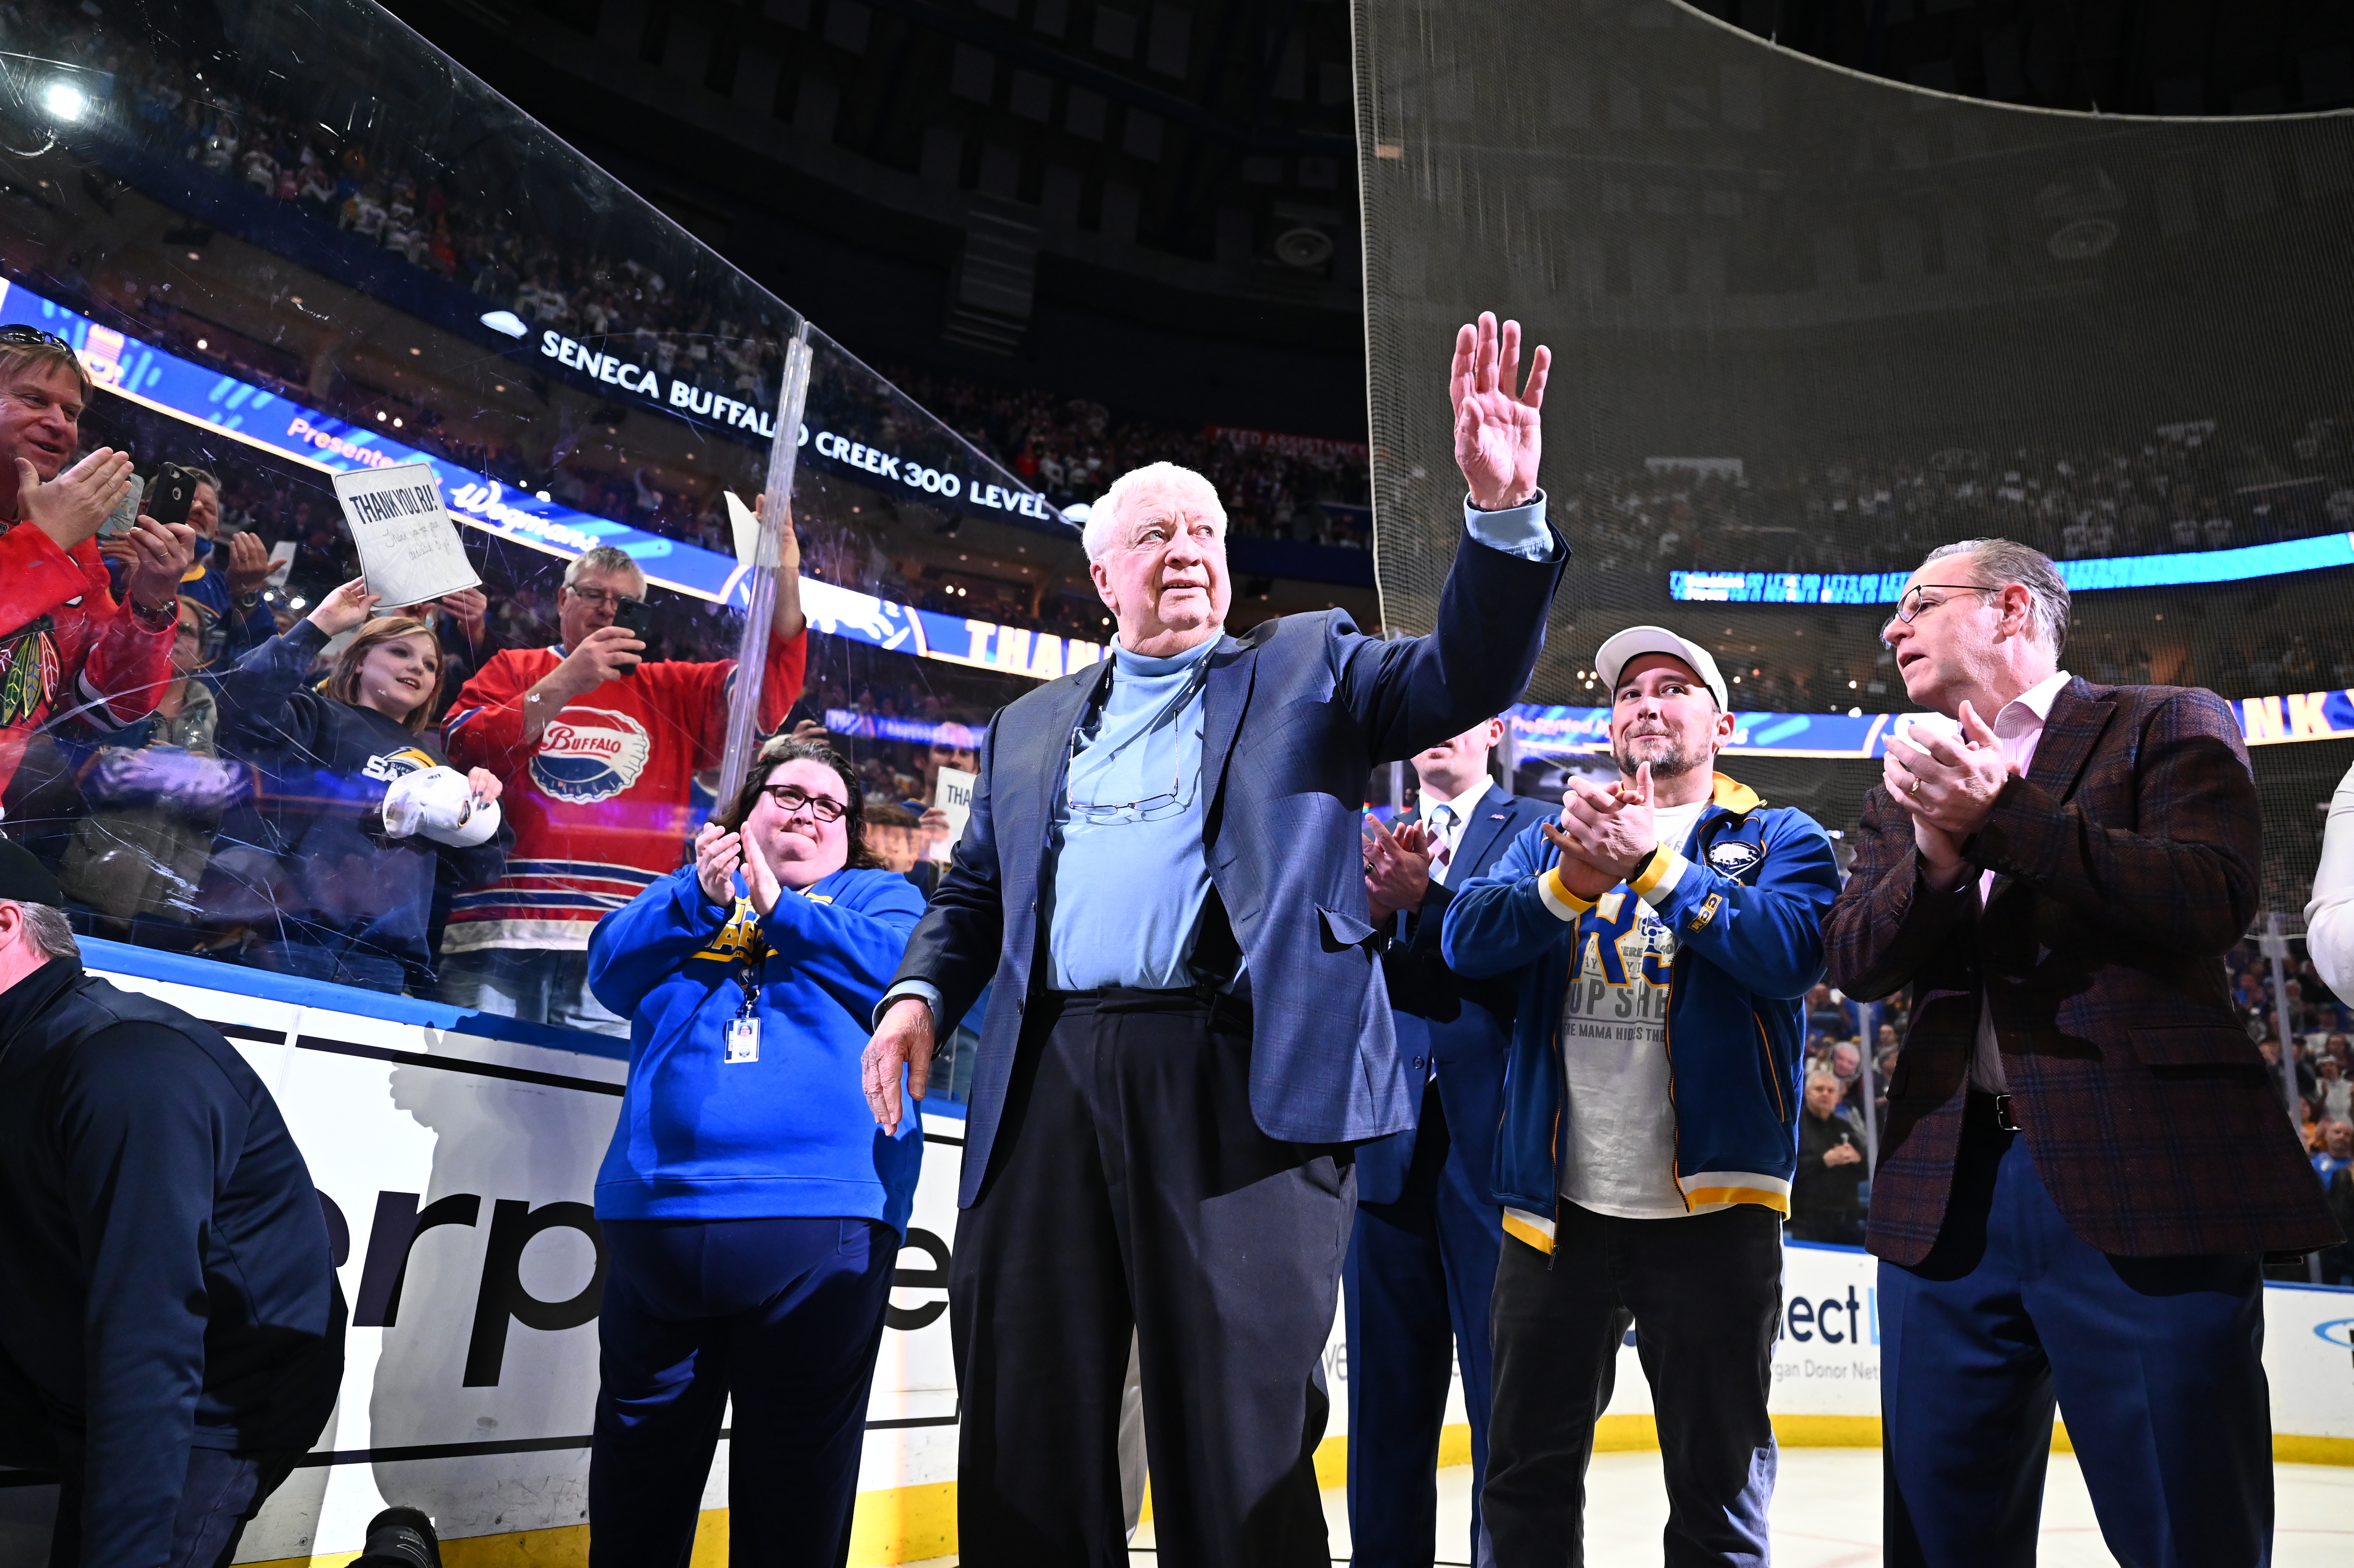 Hall of Fame broadcaster Rick Jeanneret has died - HockeyFeed